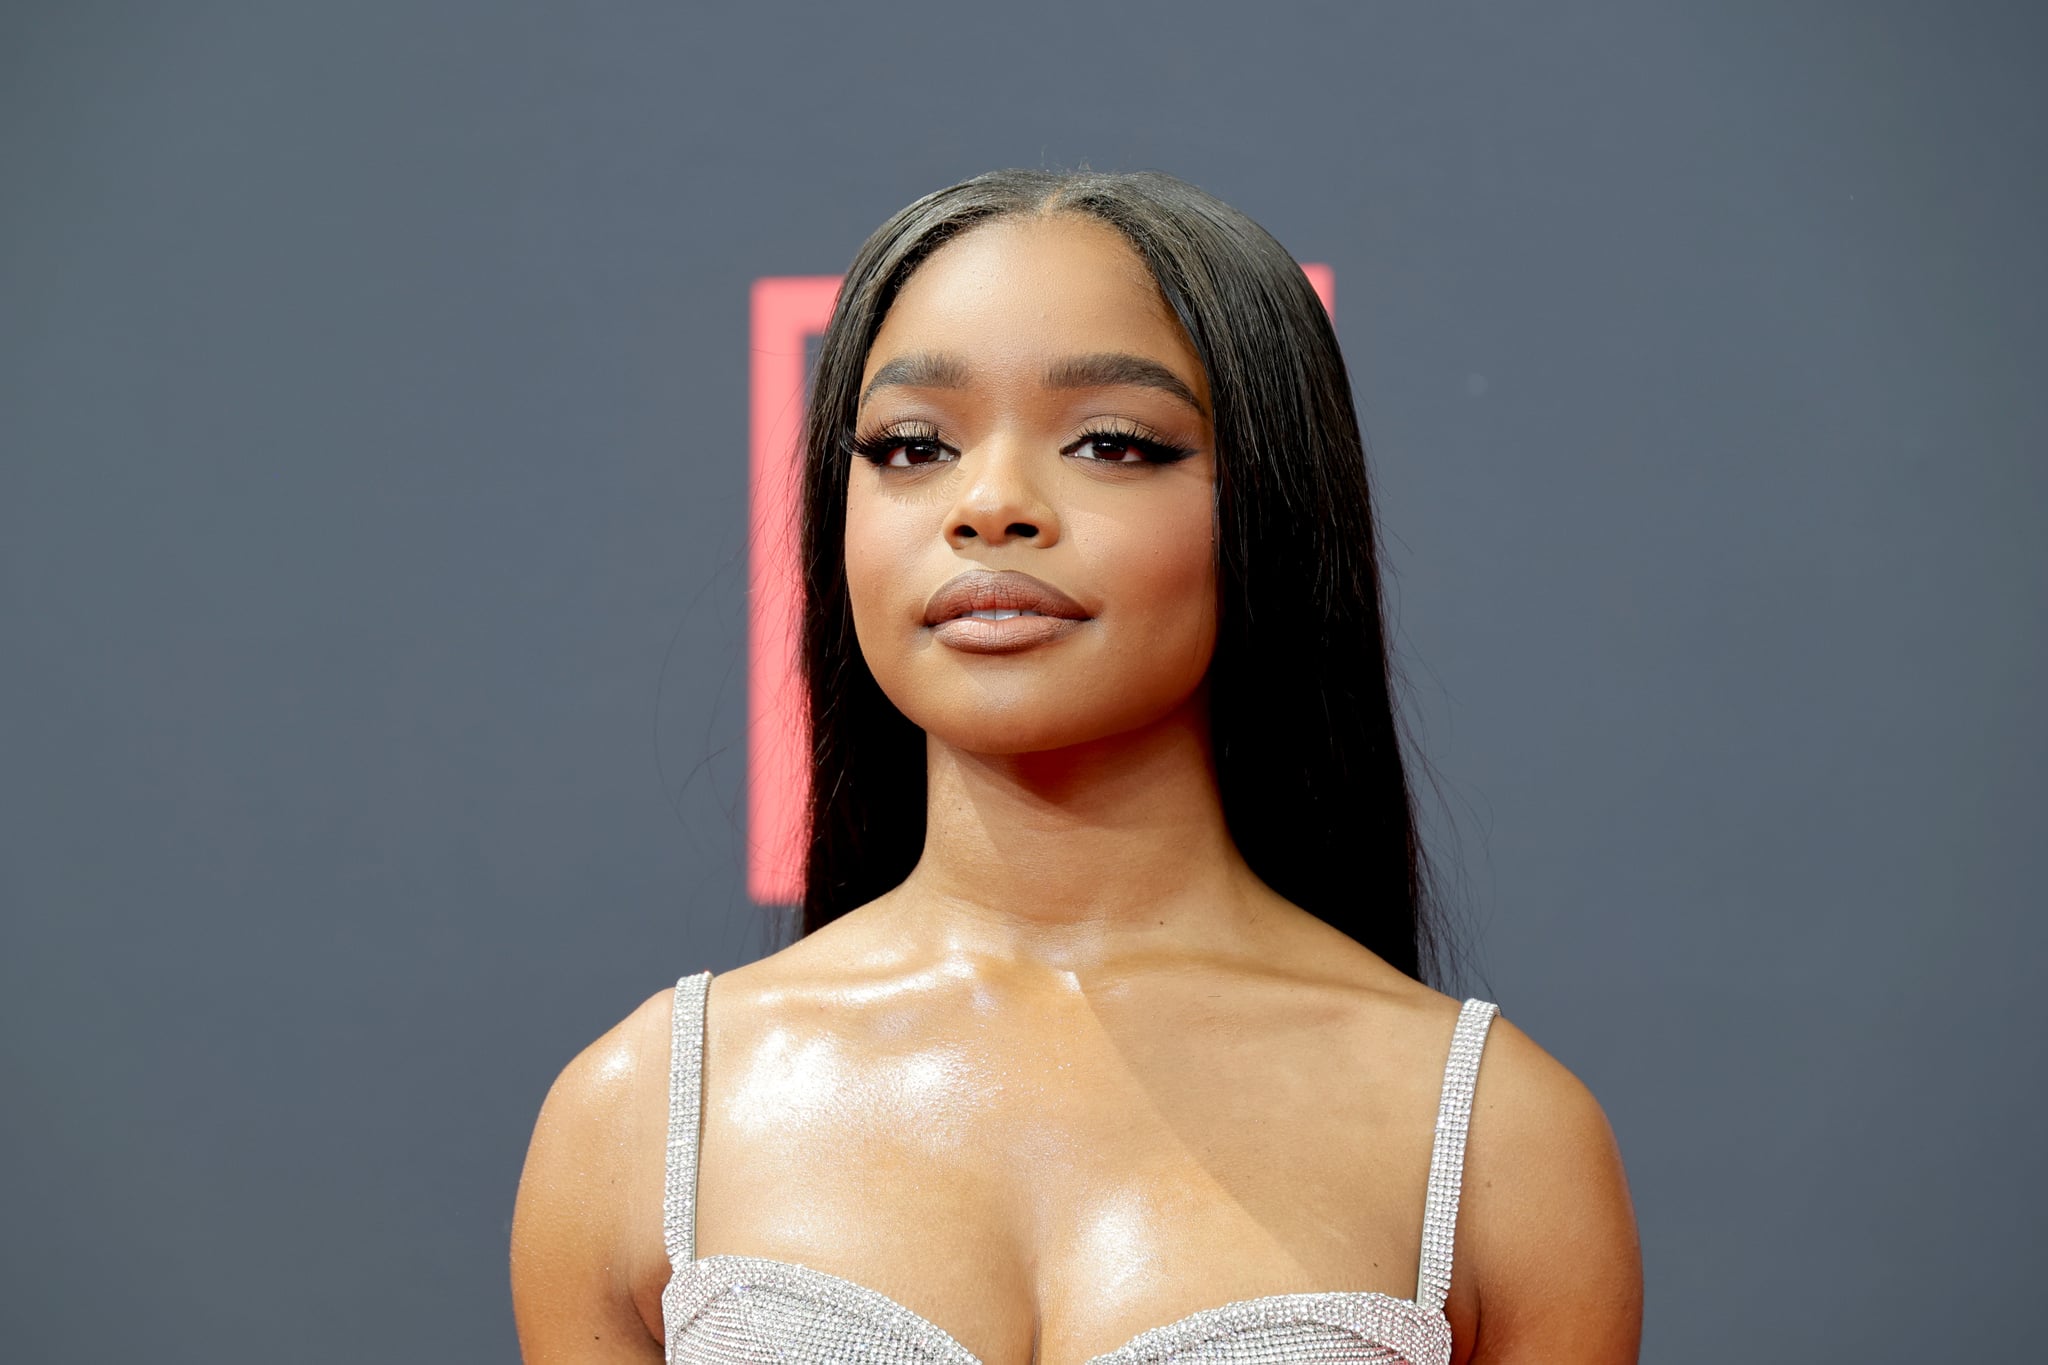 LOS ANGELES, CALIFORNIA - JUNE 26: Marsai Martin attends the 2022 BET Awards at Microsoft Theater on June 26, 2022 in Los Angeles, California. (Photo by Momodu Mansaray/WireImage)